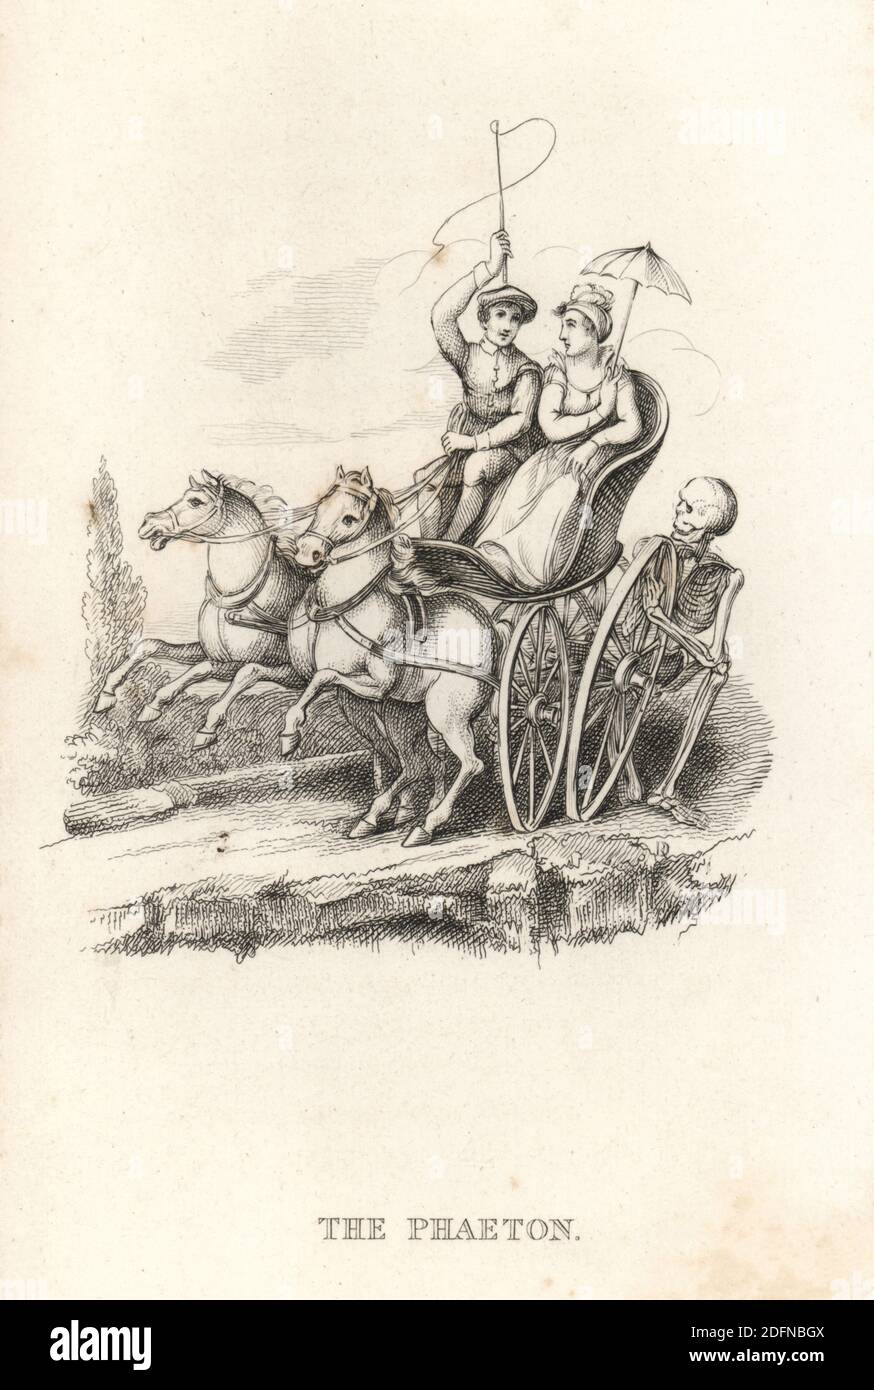 The skeleton of Death and the Phaeton. Death kneels behind a two-horse gig loosening one wheel from the axle. A man cracks a whip in the driver’s seat and a woman holds a parasol. Illustration drawn and engraved on steel by Richard Dagley from his own Death’s Doings, Consisting of Numerous Original Compositions in Verse and Prose, J. Andrews, London, 1827. Dagley (1761-1841) was an English painter, illustrator and engraver. Stock Photo